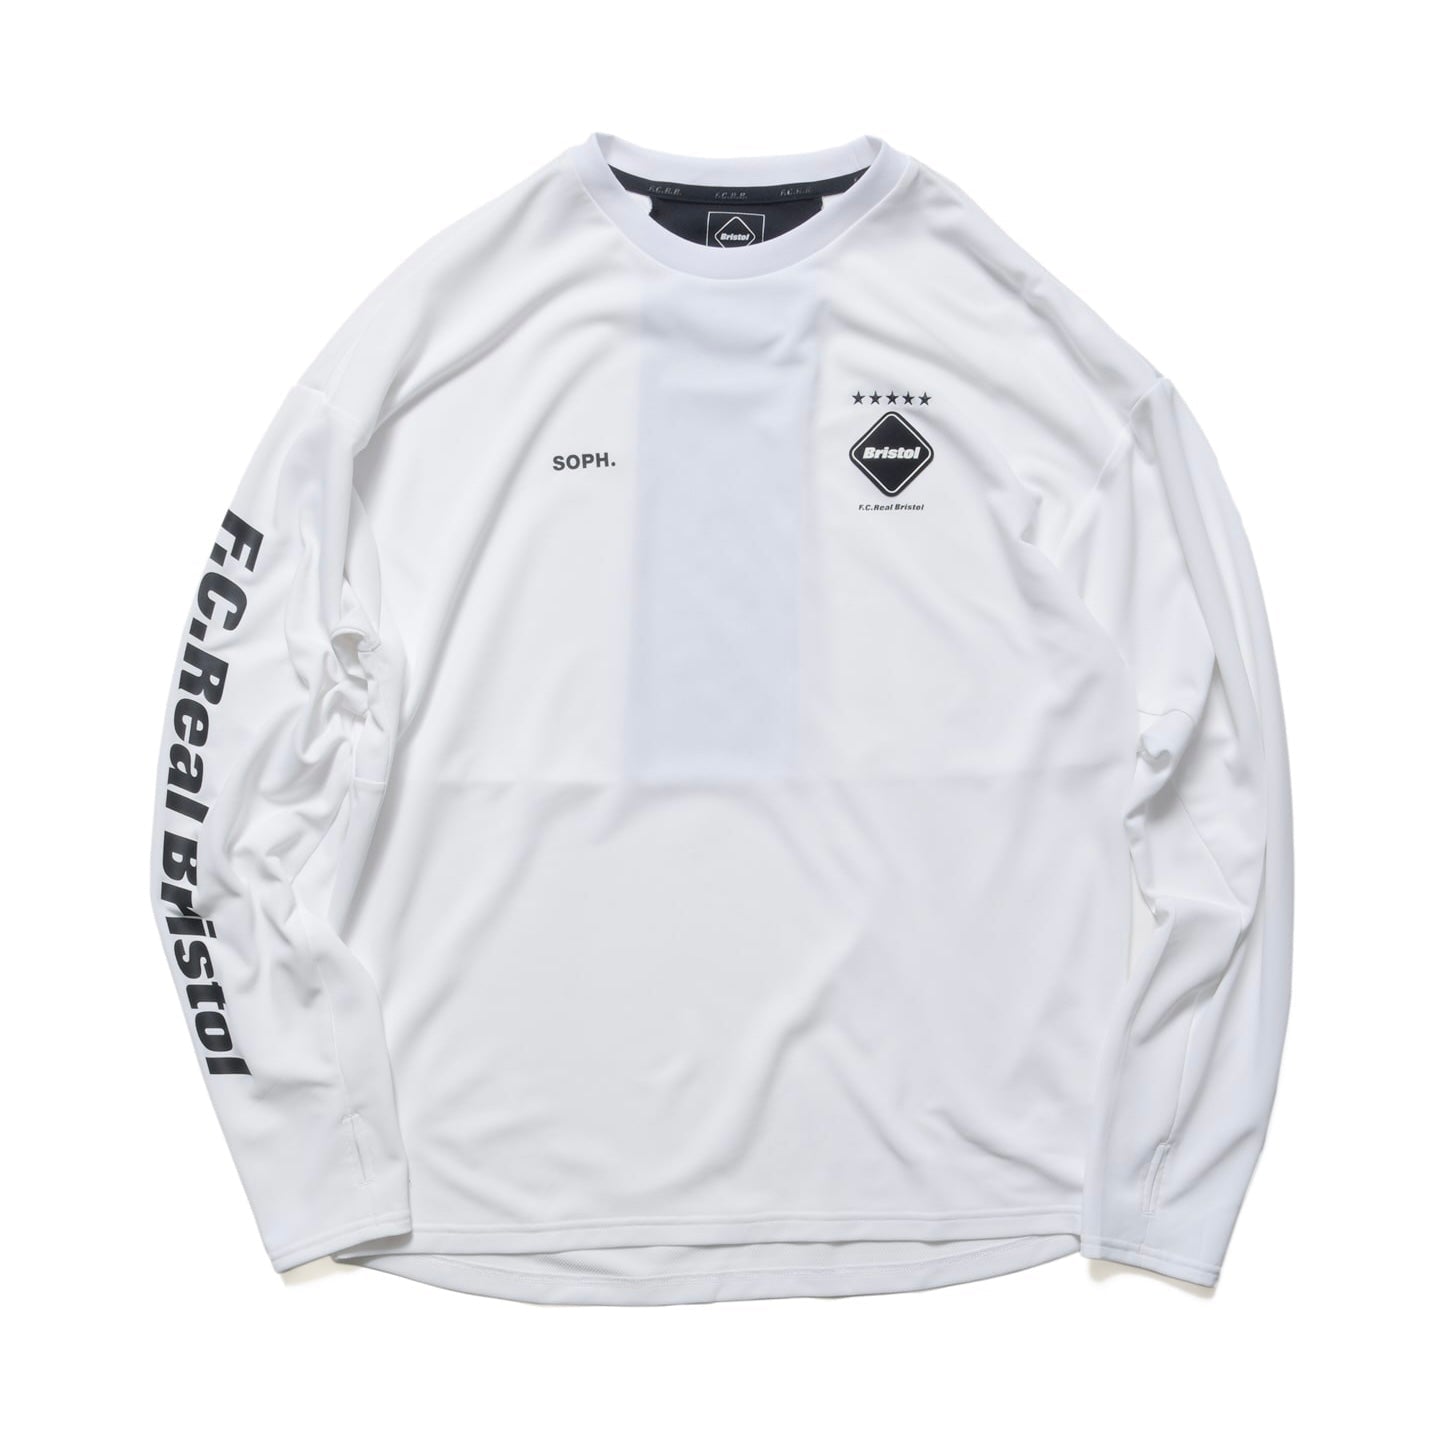 L/S TEAM PRACTICE TOP – TIME AFTER TIME